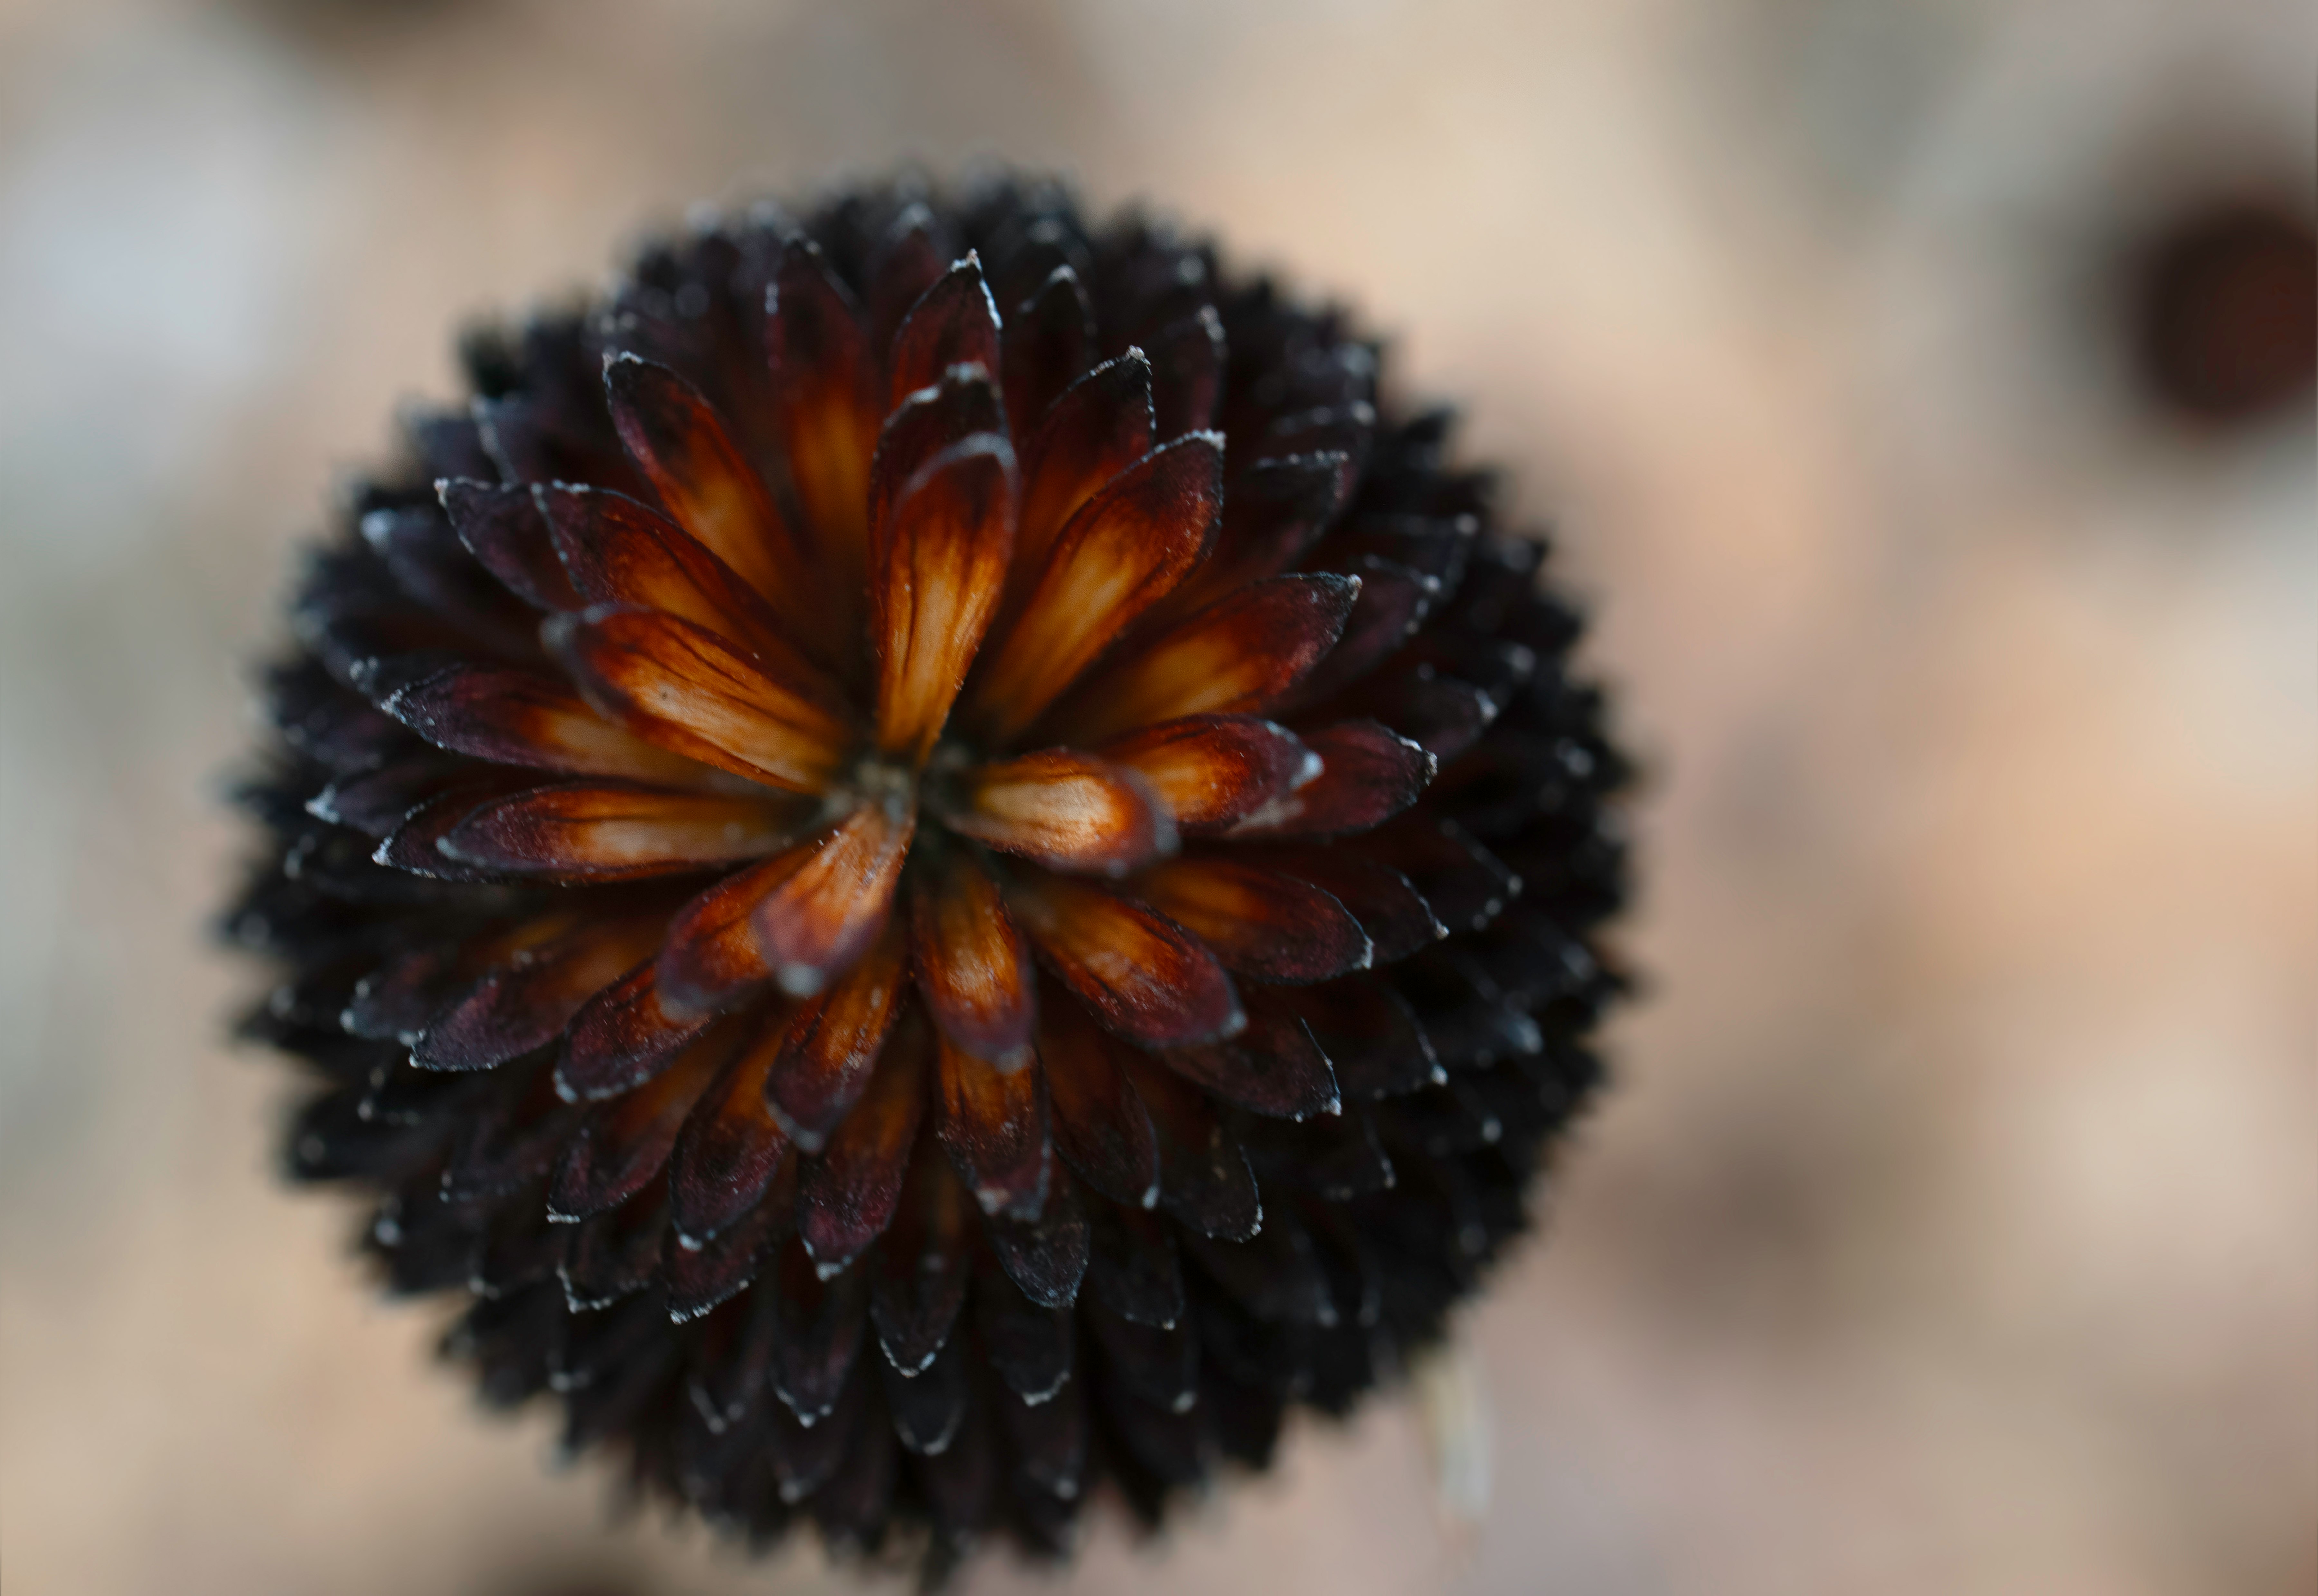 brown and black flower in close up photography